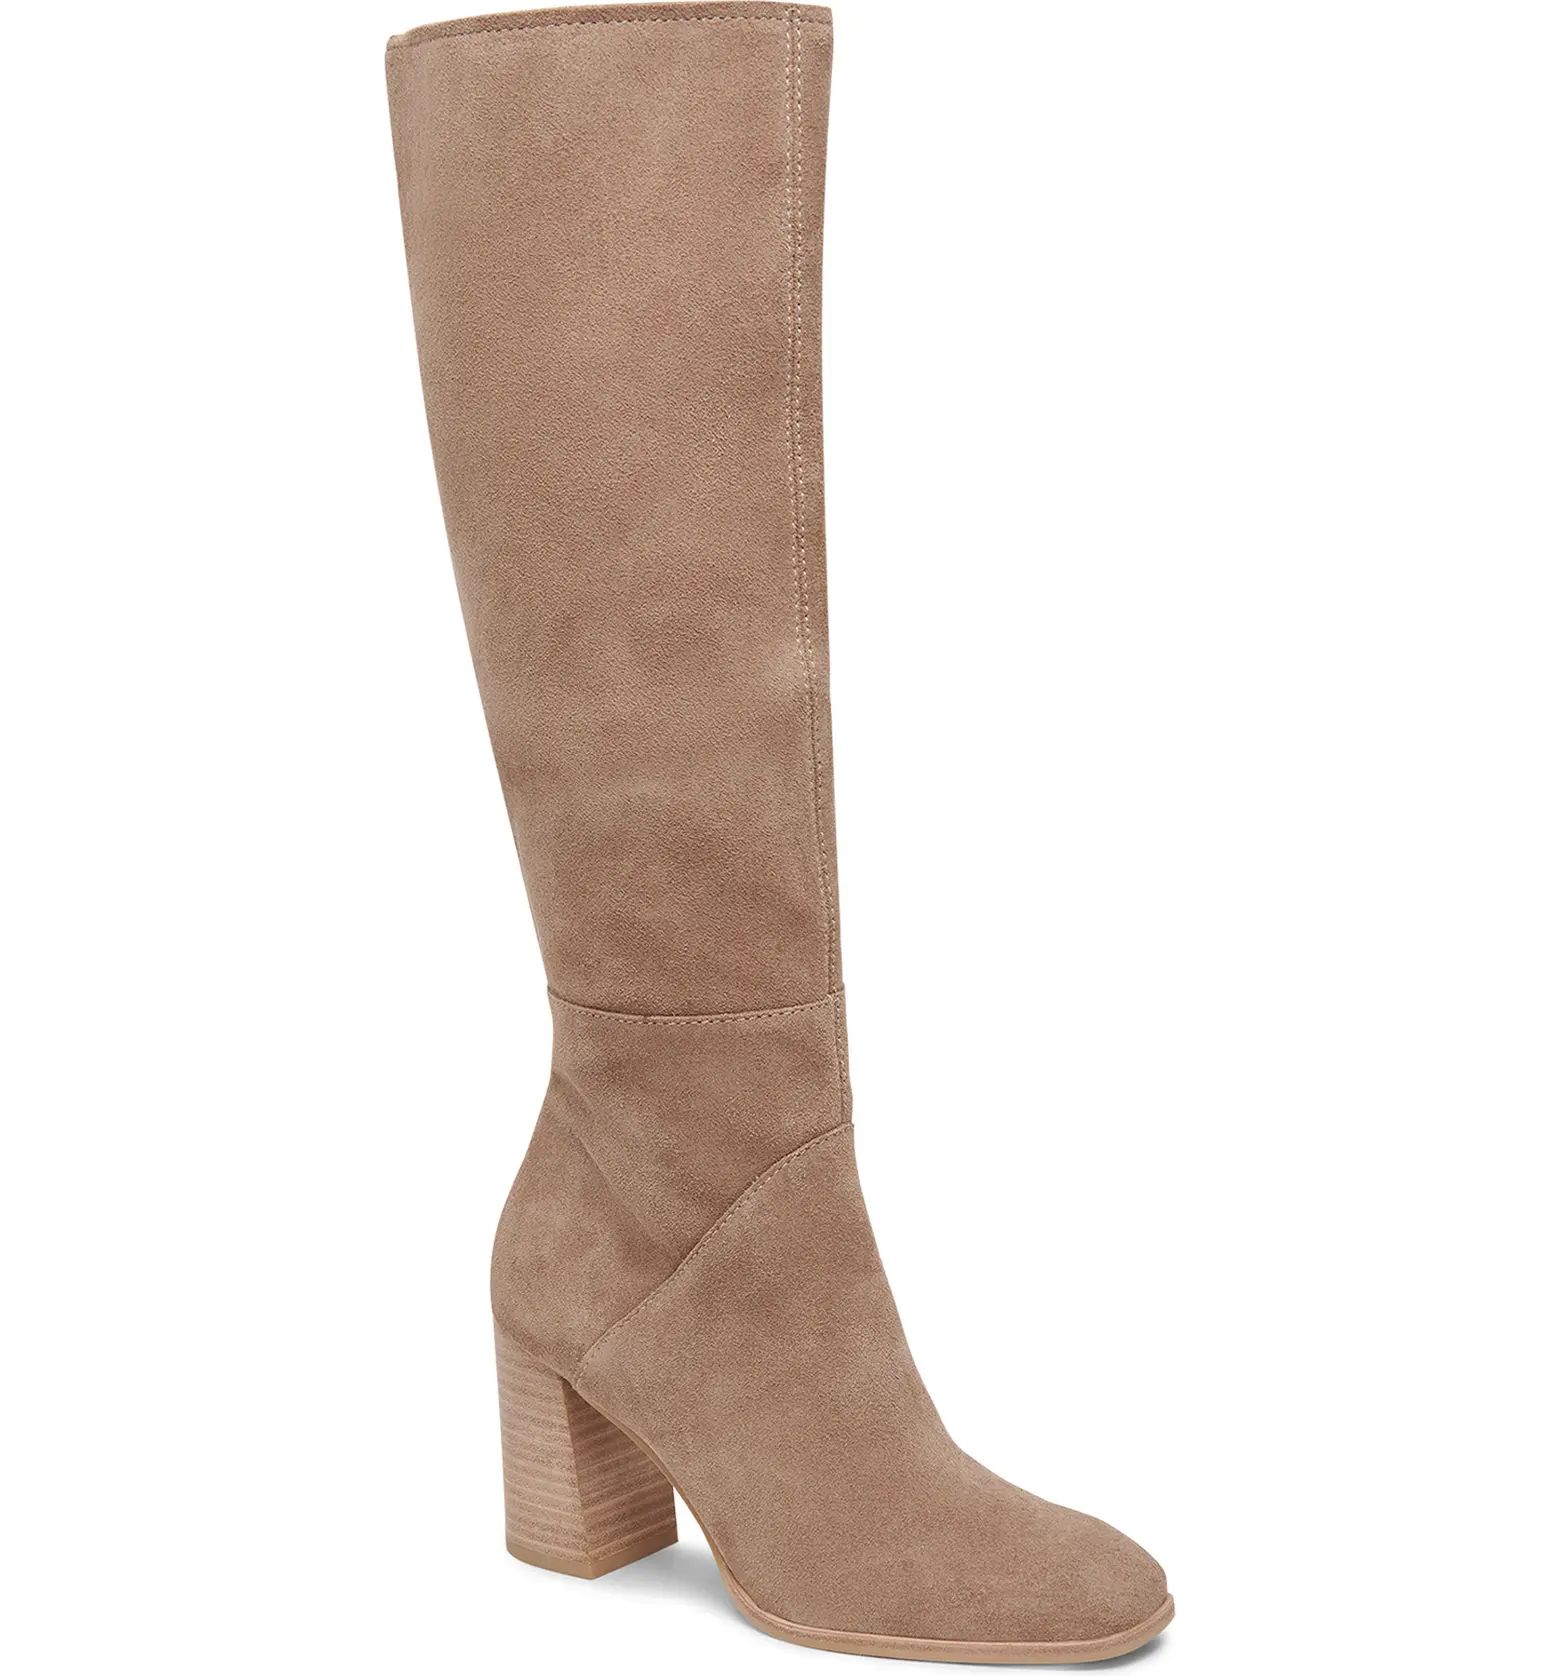 A lofty block heel lengthens the profile of a knee-high boot that's a suave style standby. | Nordstrom